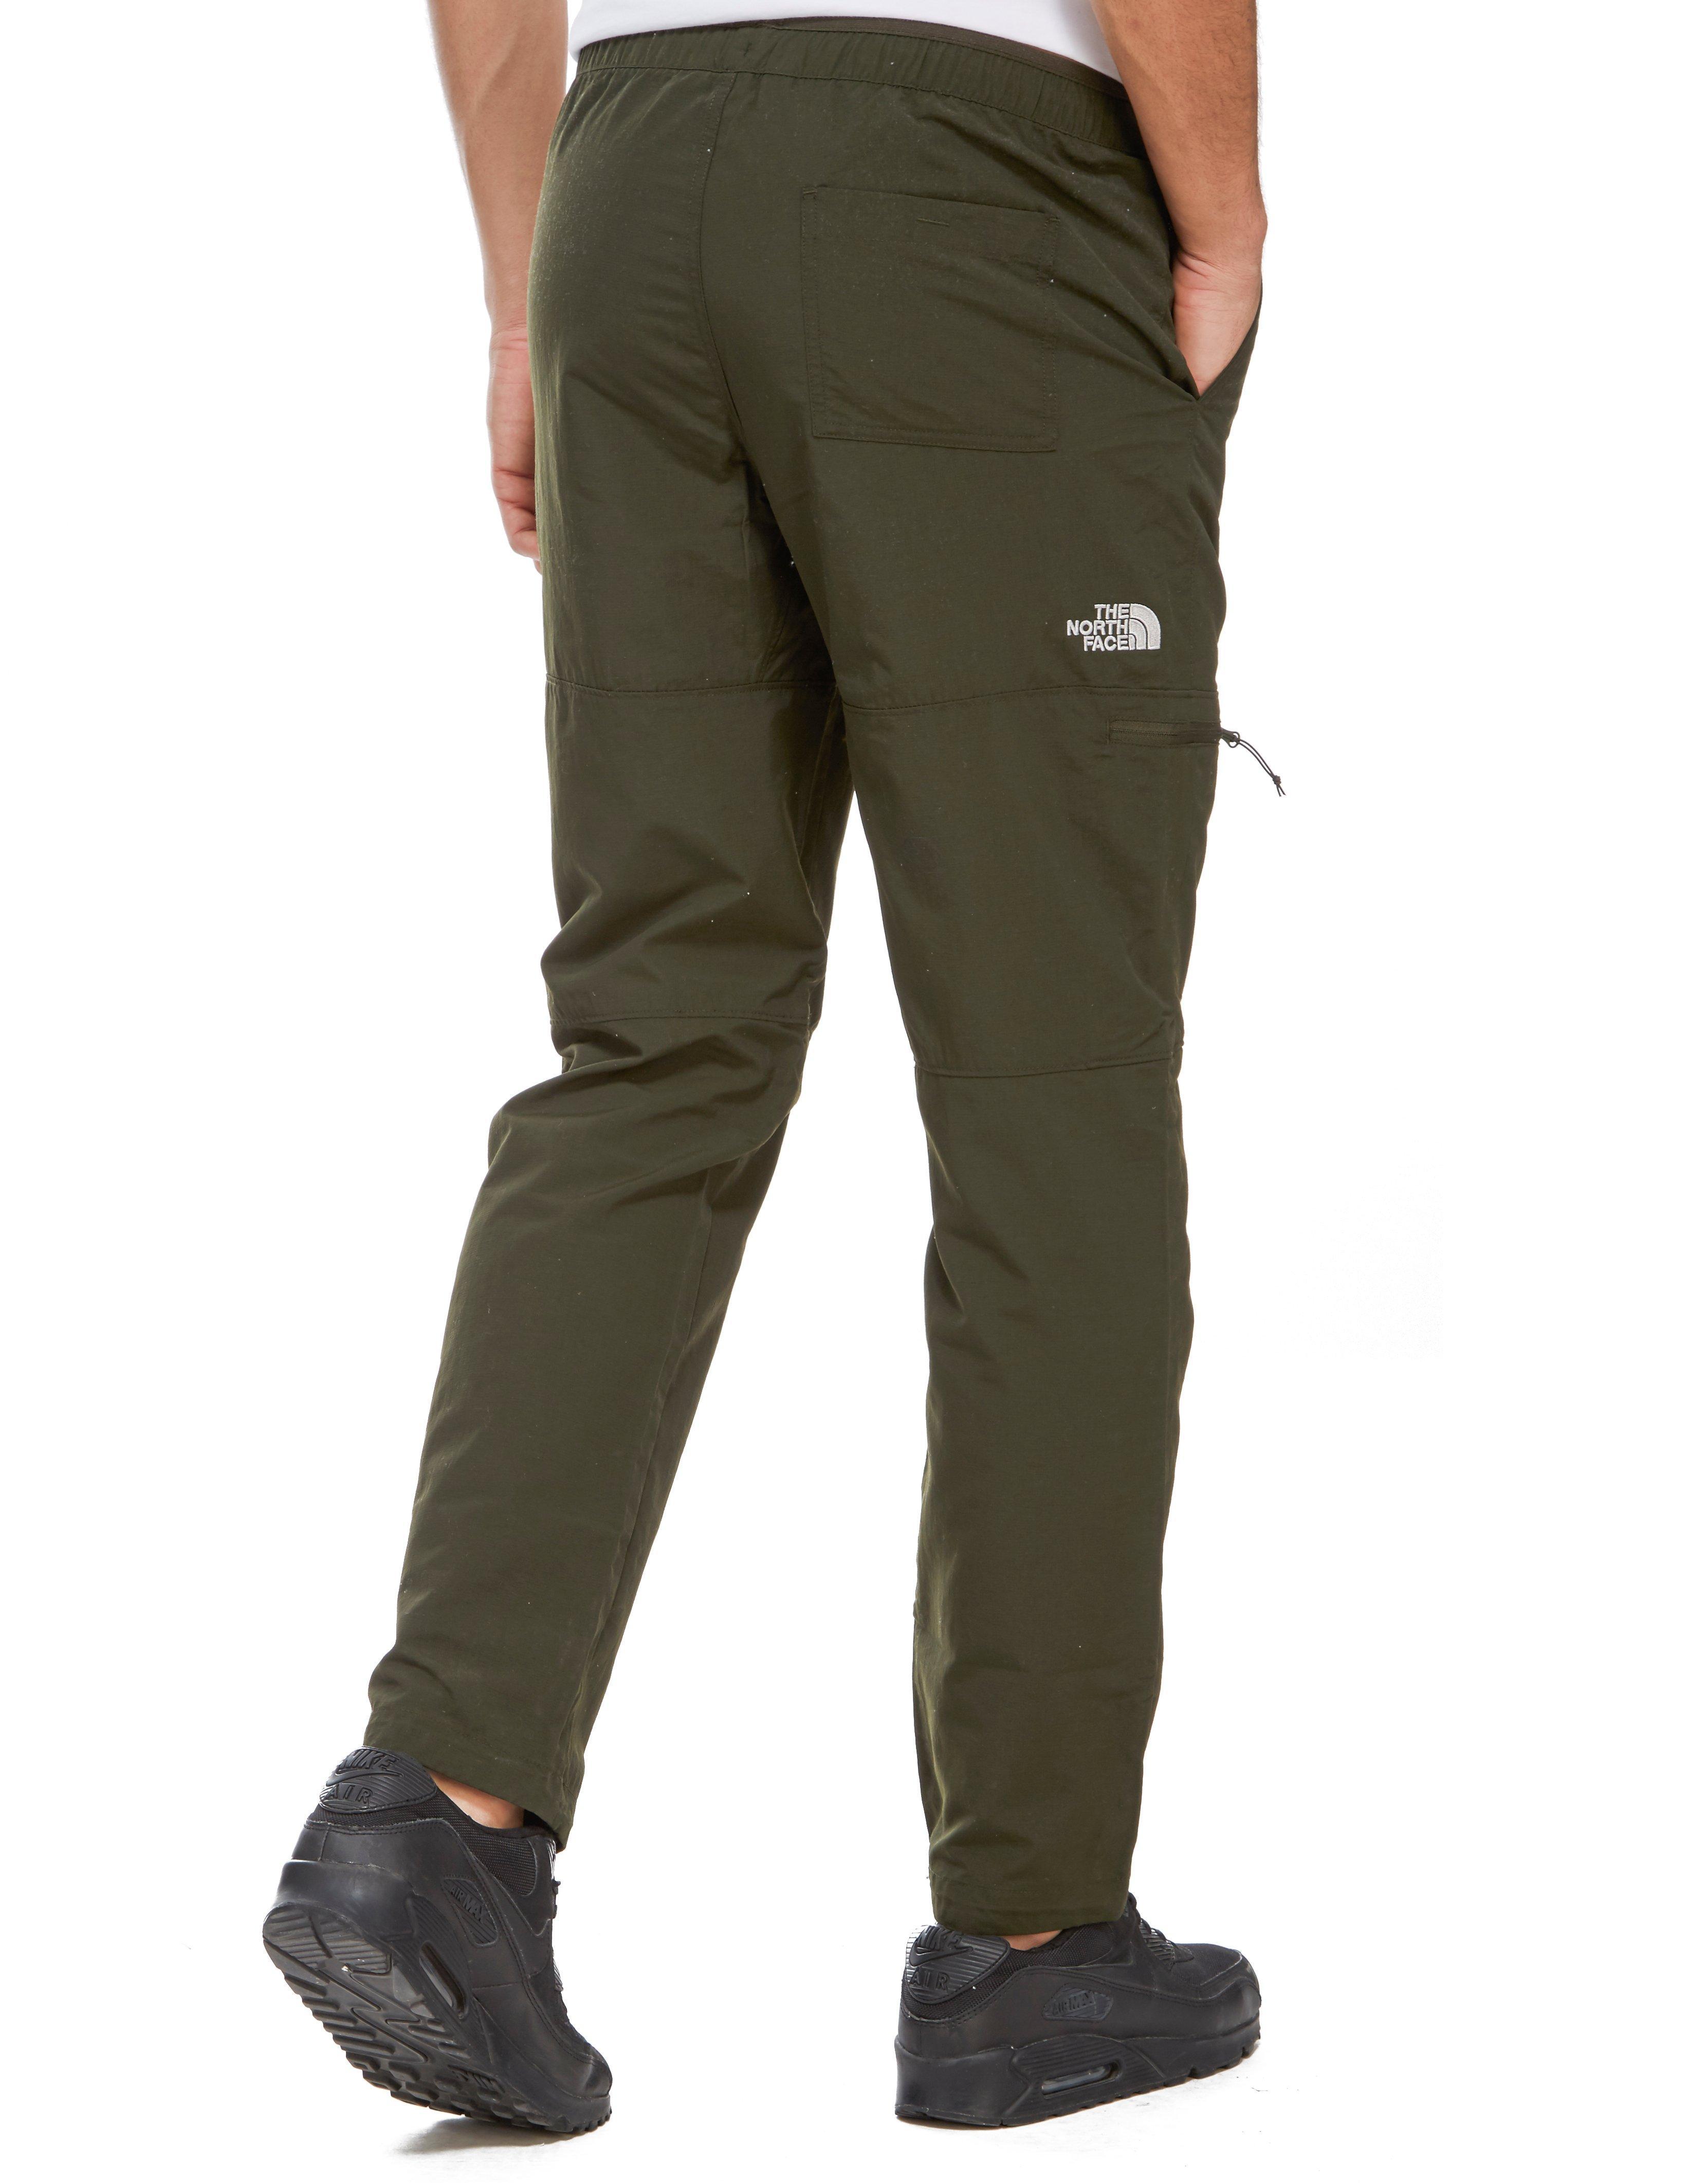 Lyst - The North Face Woven Cargo Pants in Green for Men